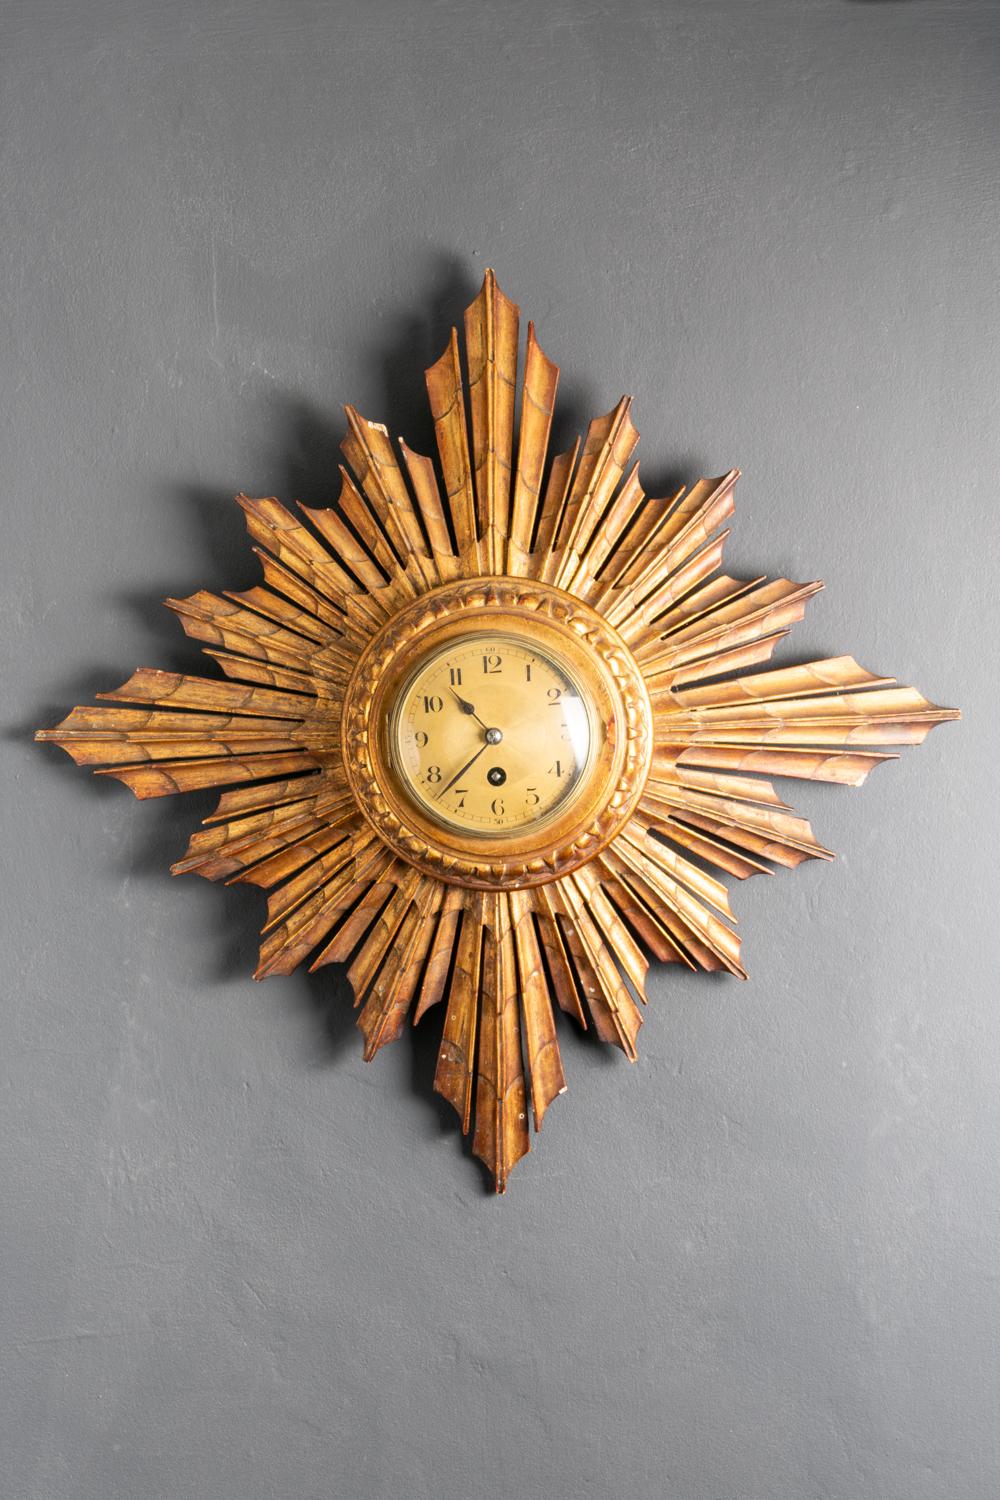 This magnificent late 19th-century French sunburst gilt wood clock is made by world well known Japy Freres & Co who were French clock makers founded by Frédéric Japy in 1777. The clock has beautifully hand-carved sun rays surrounding with richly